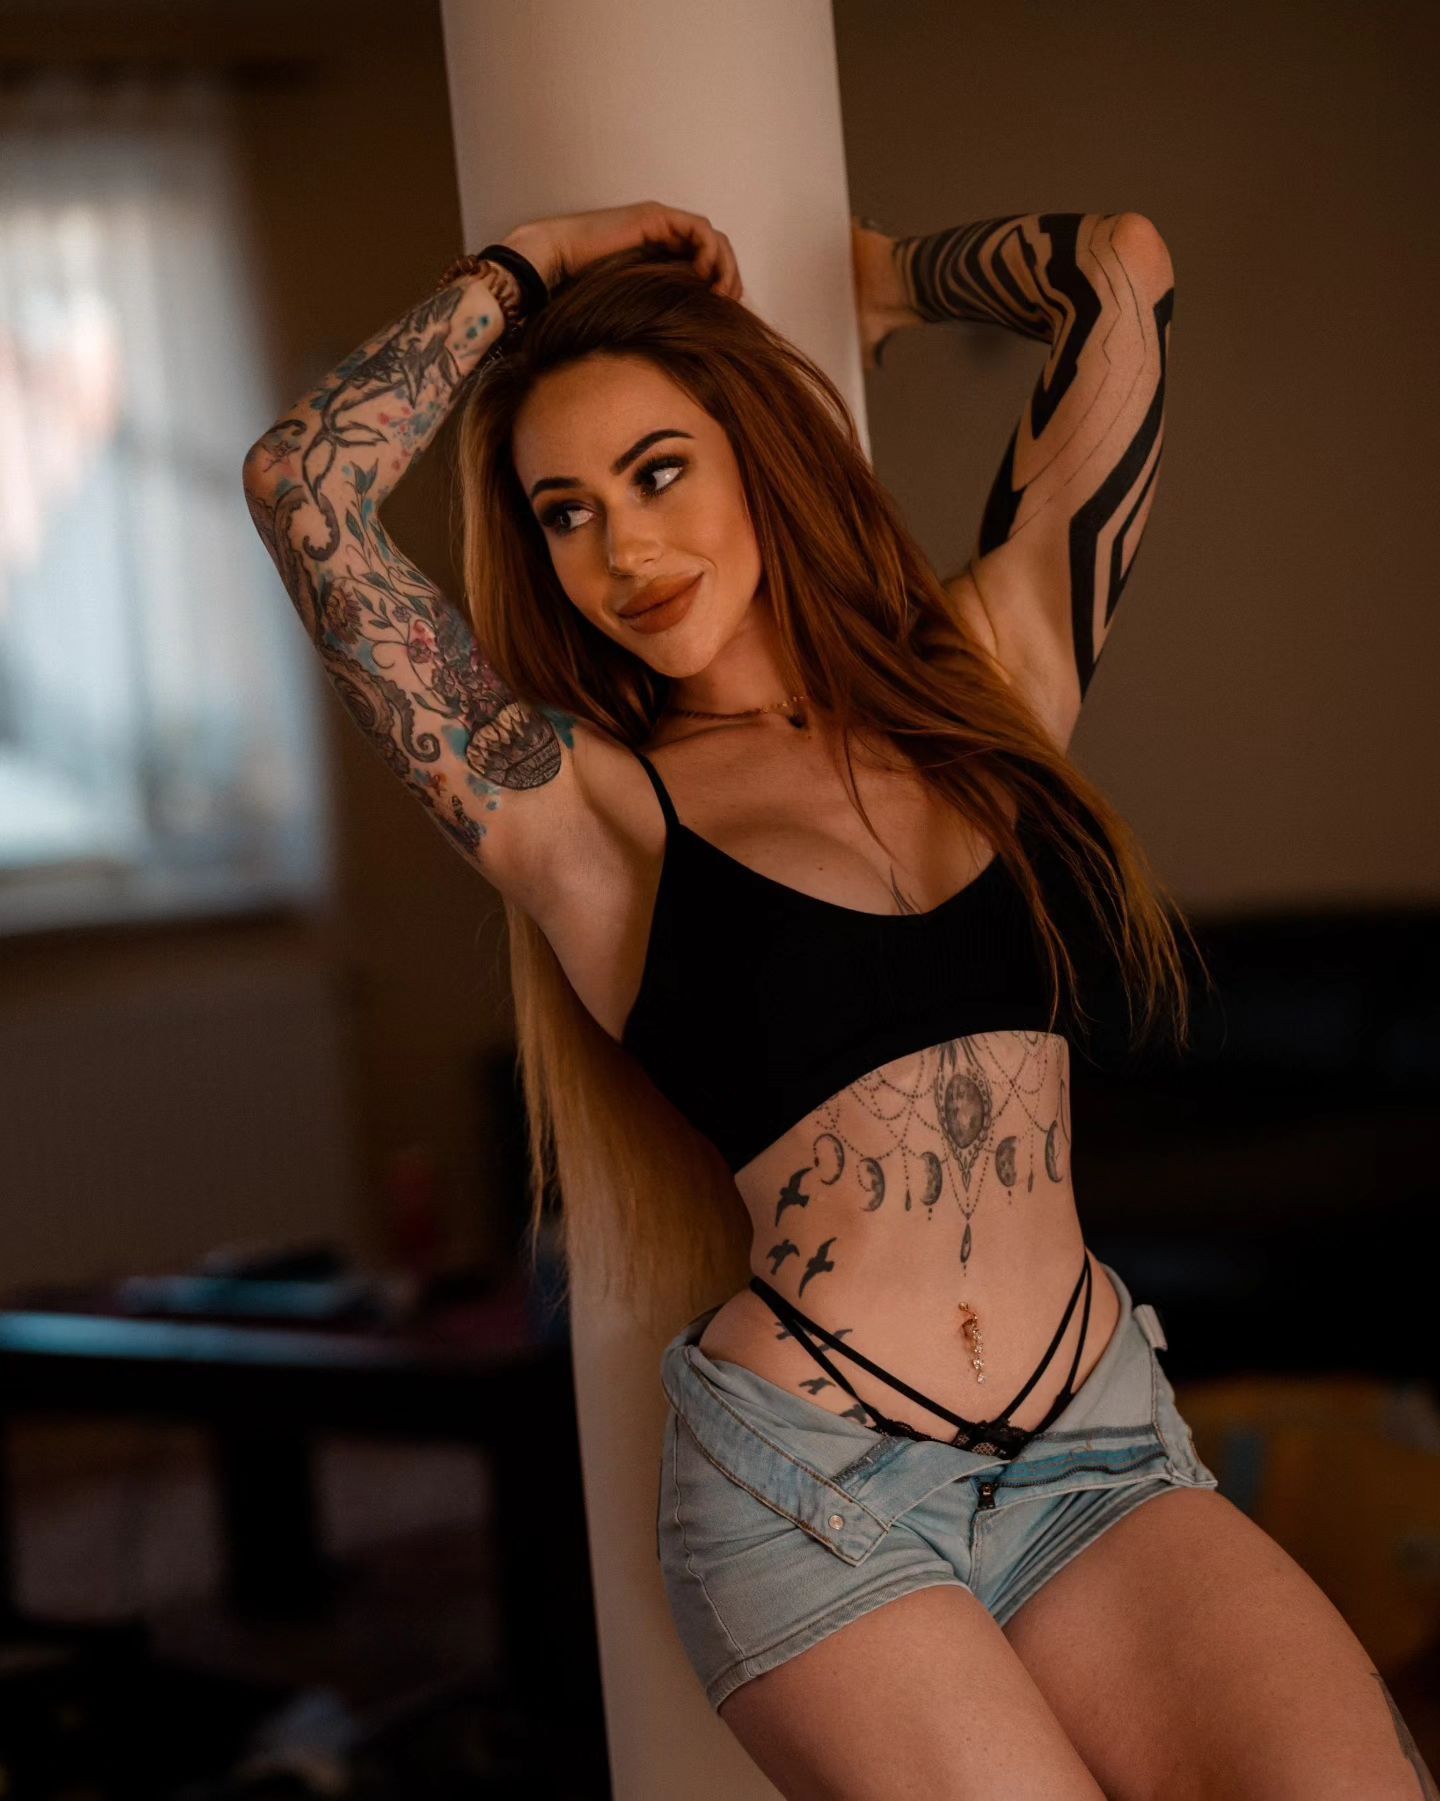 Hit the bottom and escape 🐟
📷: @amineisawi 

#fy #fyp #foryou #explorepage #explore #shooting #tattooed #tattoomodels #tattoomodel #tattoo #tattooedgirls #tattoos #ink #inkedgirl #inkedgirls #inked #redhead #redhair #redheads #gingergirl #gingergirls #ginger #models #modeling #hotgirls #hotmodel #hotgirl #hotgirls